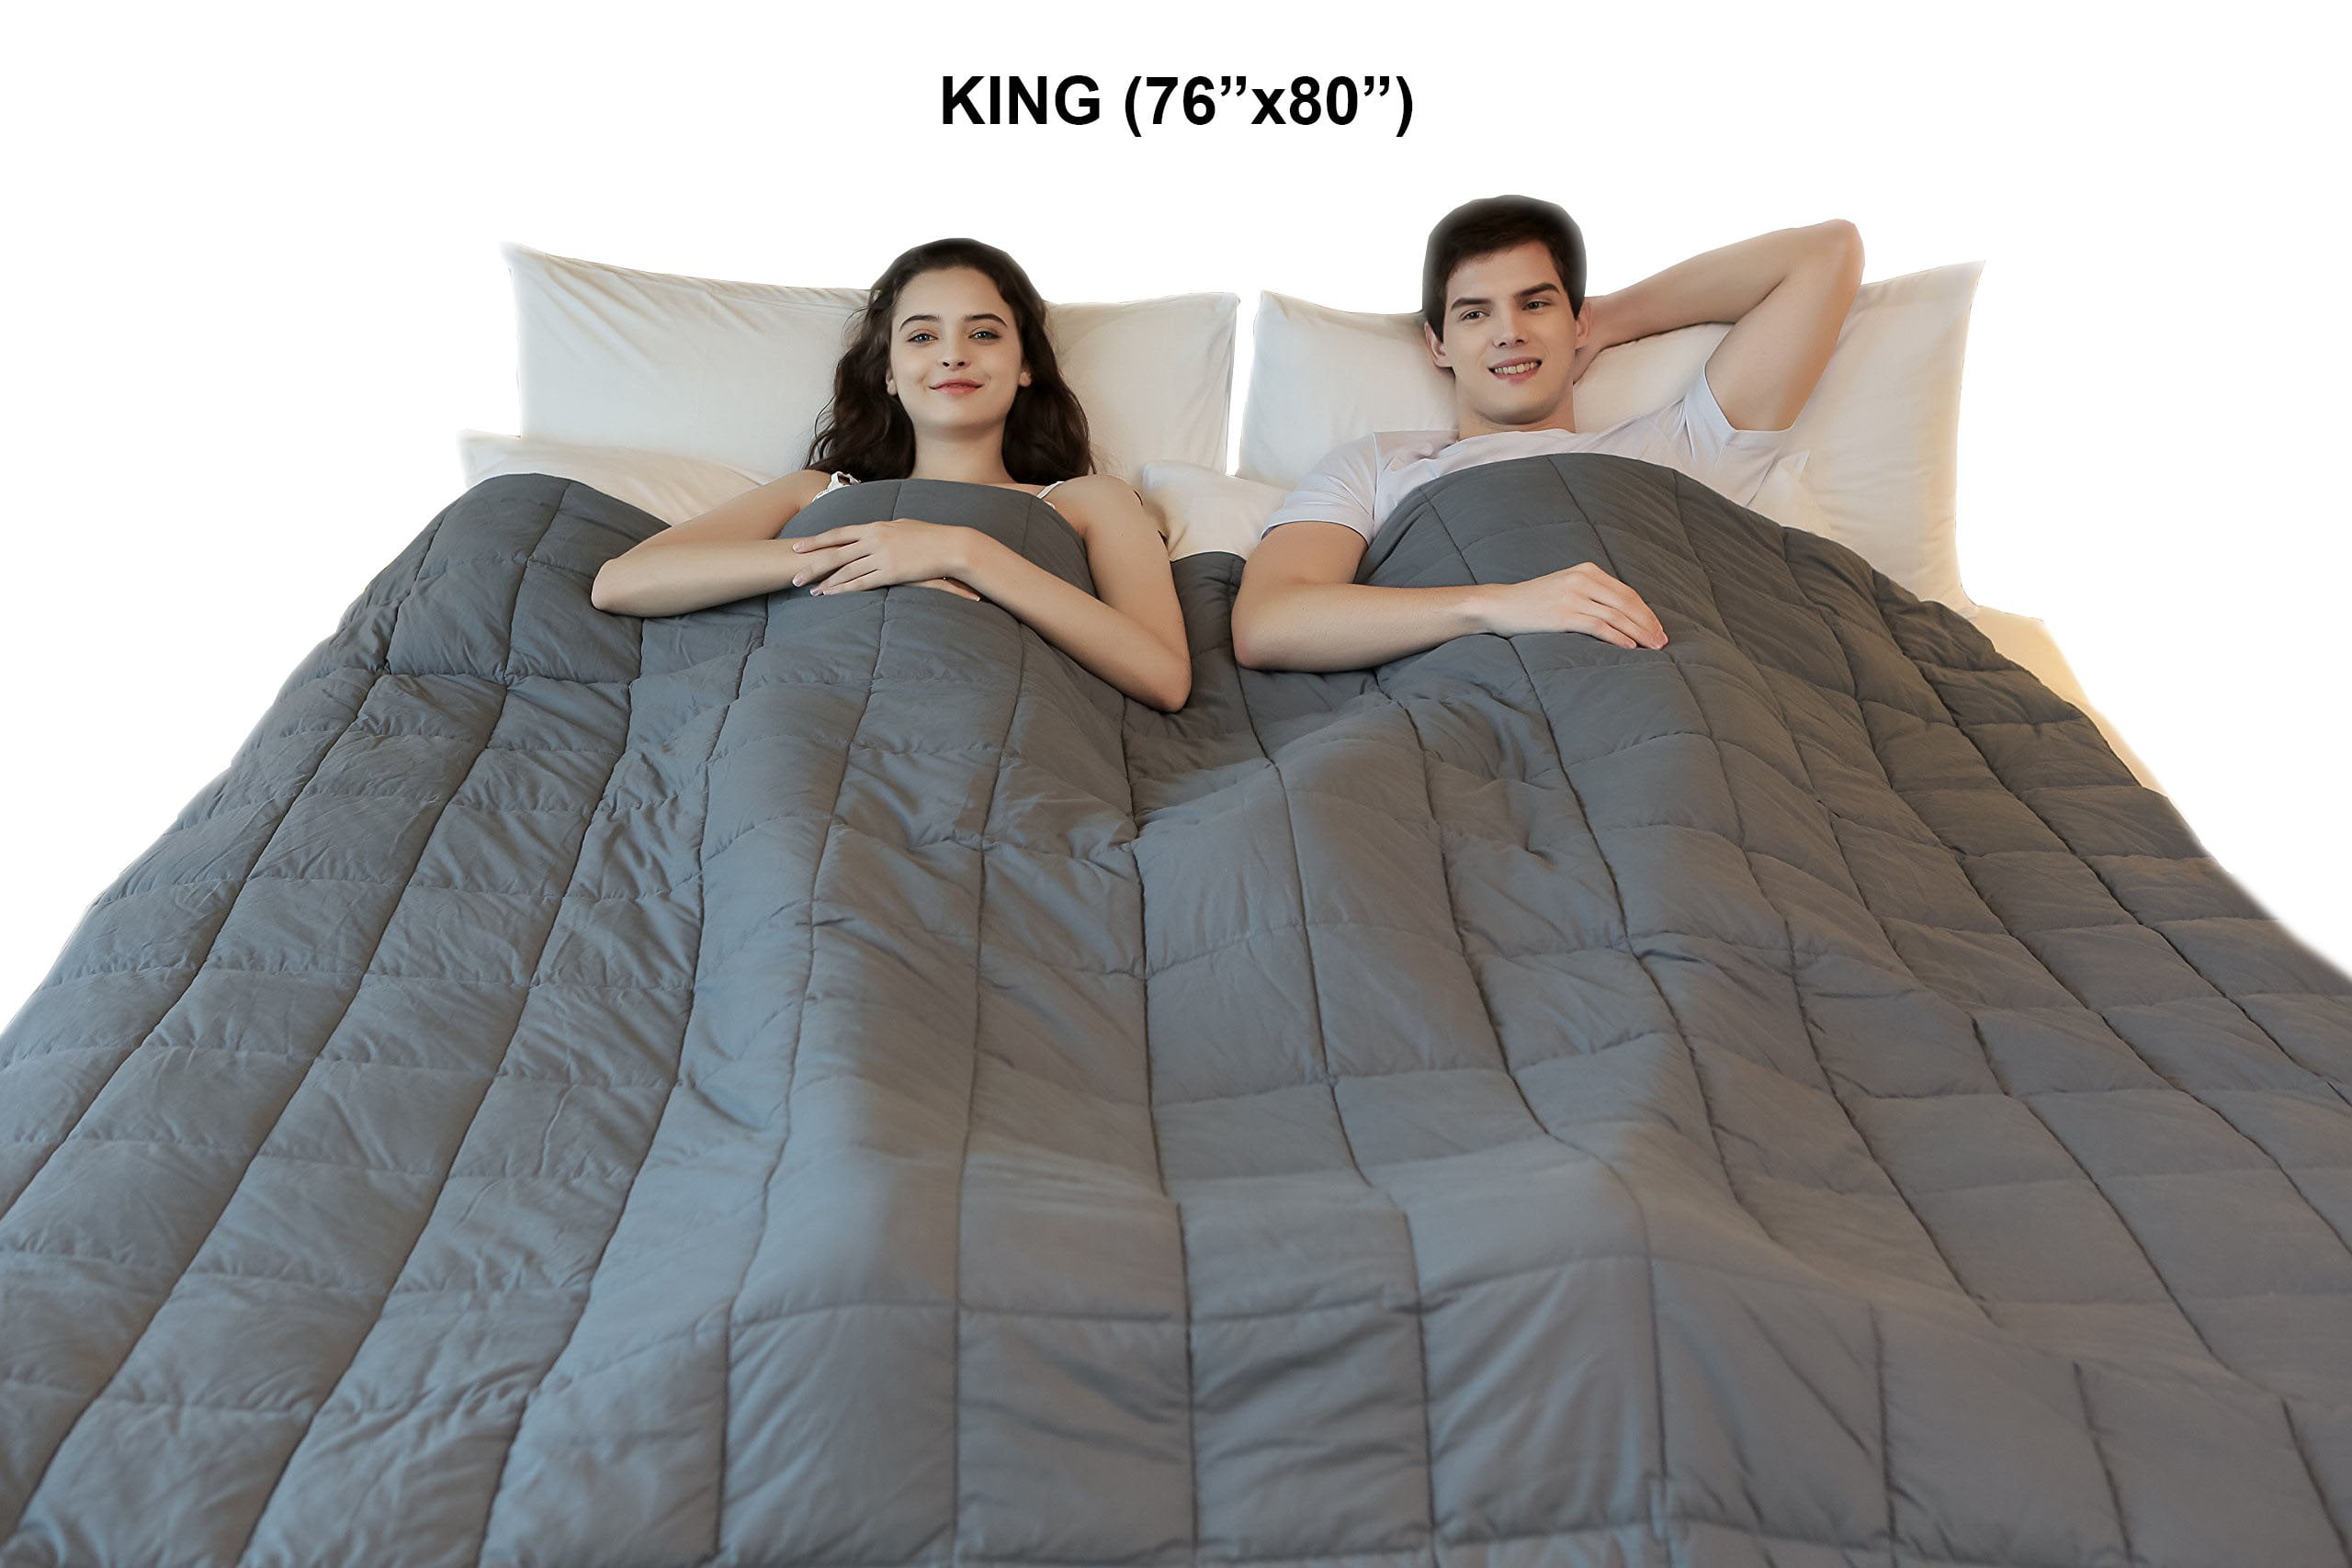 King Sized Weighted Blanket - Soft Weighted Throw Blanket Heavy